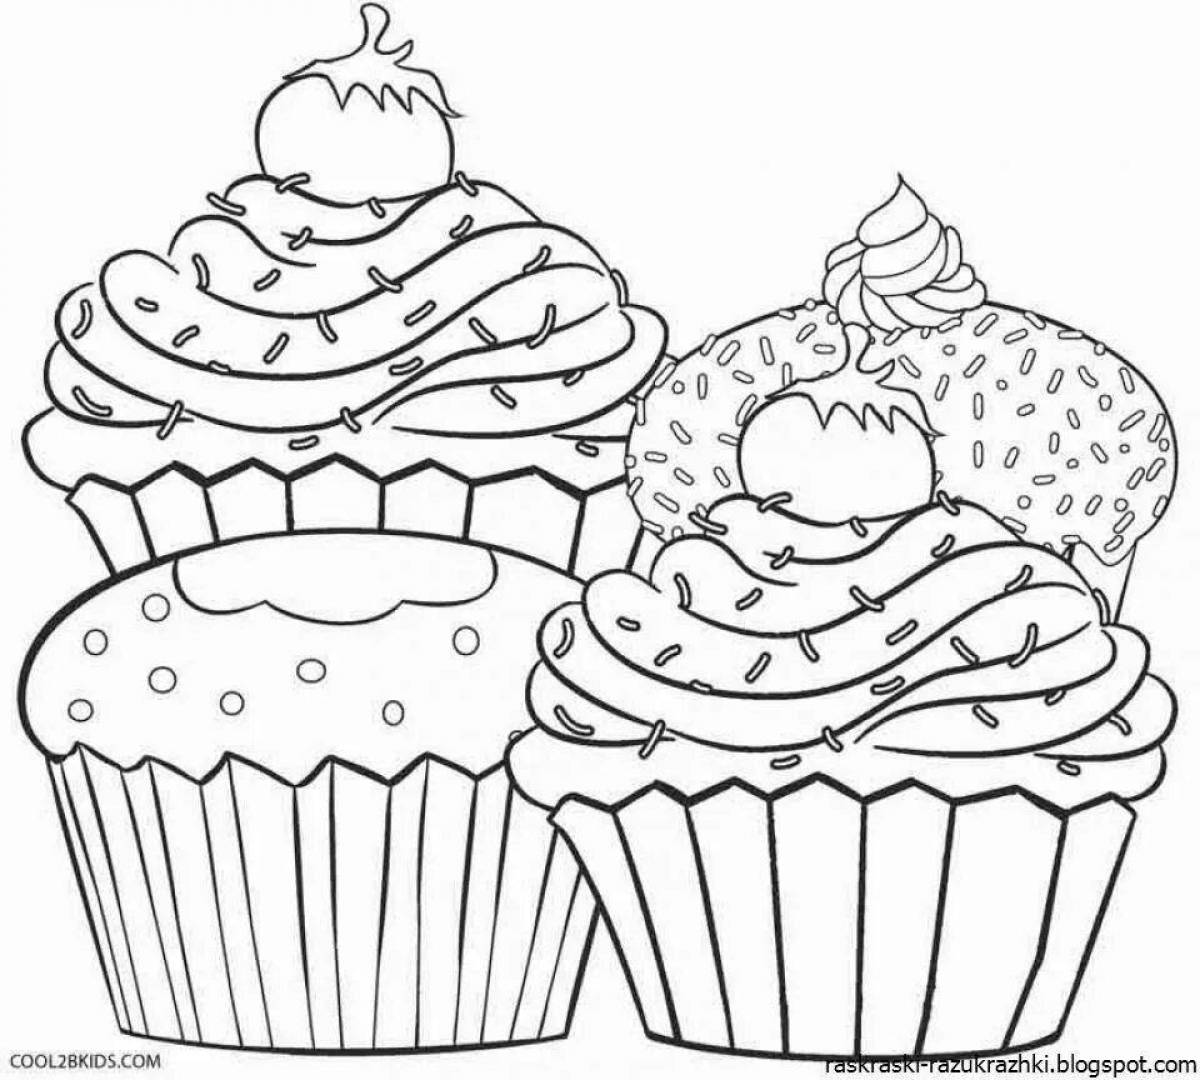 Sweet donut coloring page